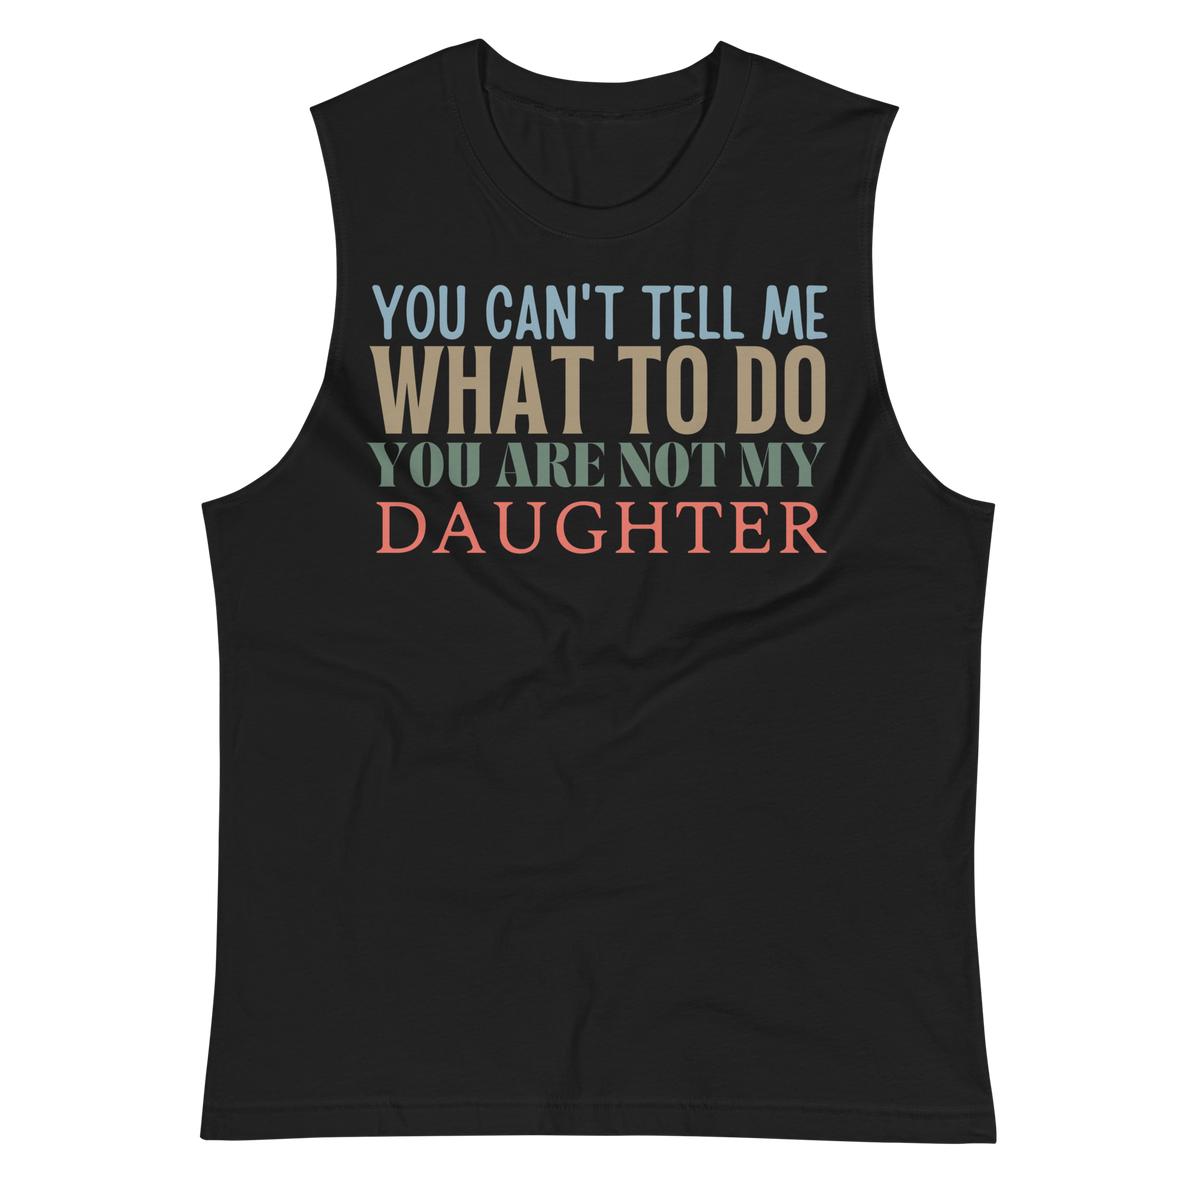 Dad Shirt, Fathers Day Shirt, Funny Mens Shirt, Funny Dad Shirt, Tell me what to do, Gift for him, Gift for her, New Papa Gift, Funny Mom Shirt, Mom Shirt, New Dad Shirt, Father Shirt, Dad tee, You Can't tell me What To Do You Are Not My Daughter Shirt, Muscle Shirt, Sleeveless Shirt